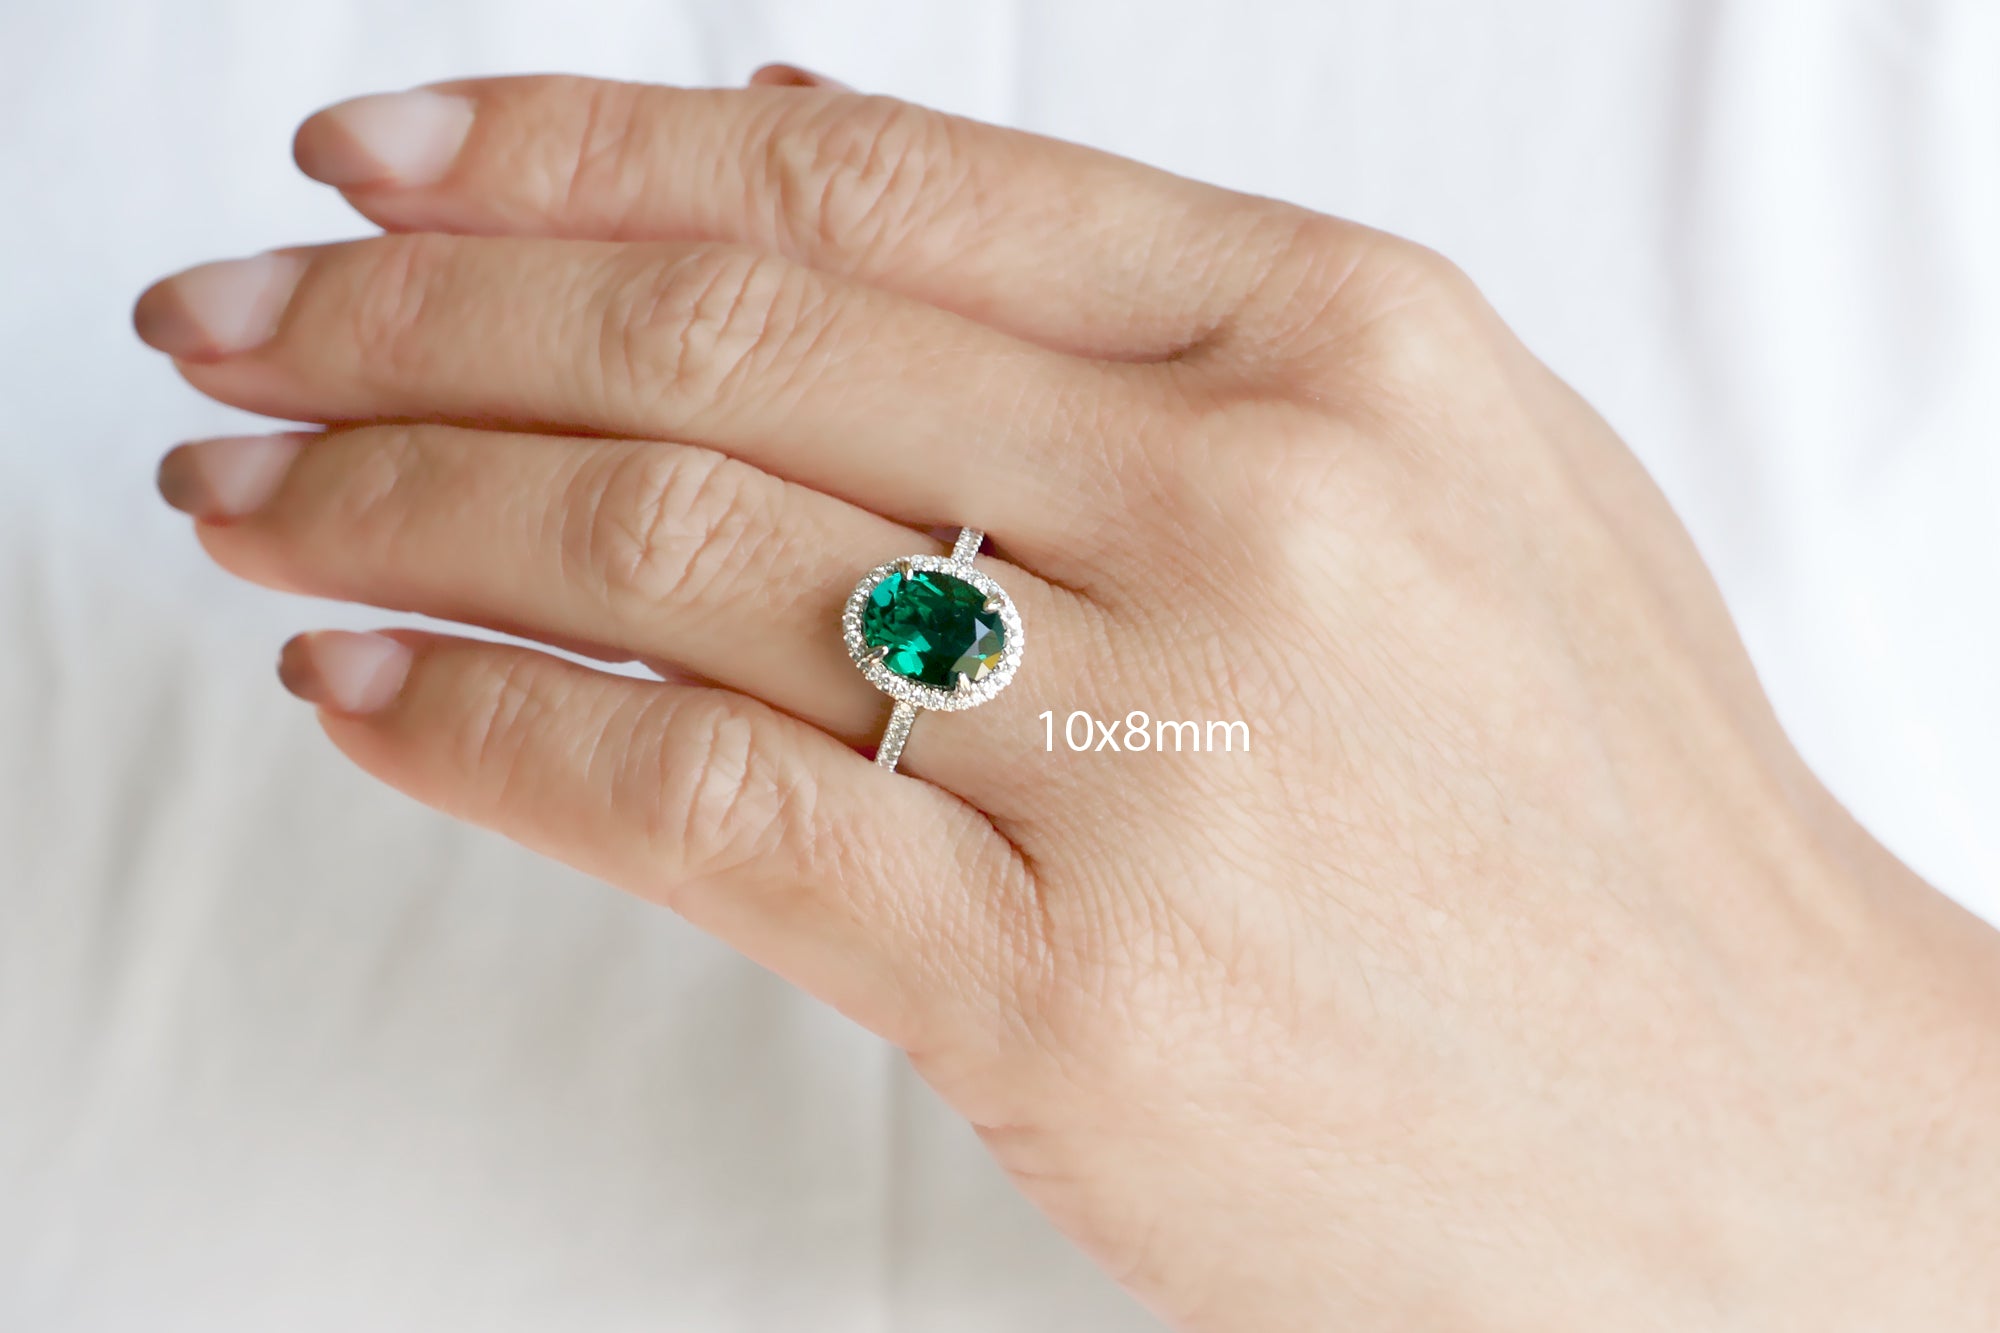 Emerald Engagement ring,6x8mm Oval Cut Vintage Emerald ring,Princess Diana  Ring,white gold plated,sterling silver CZ wedding band,Promise